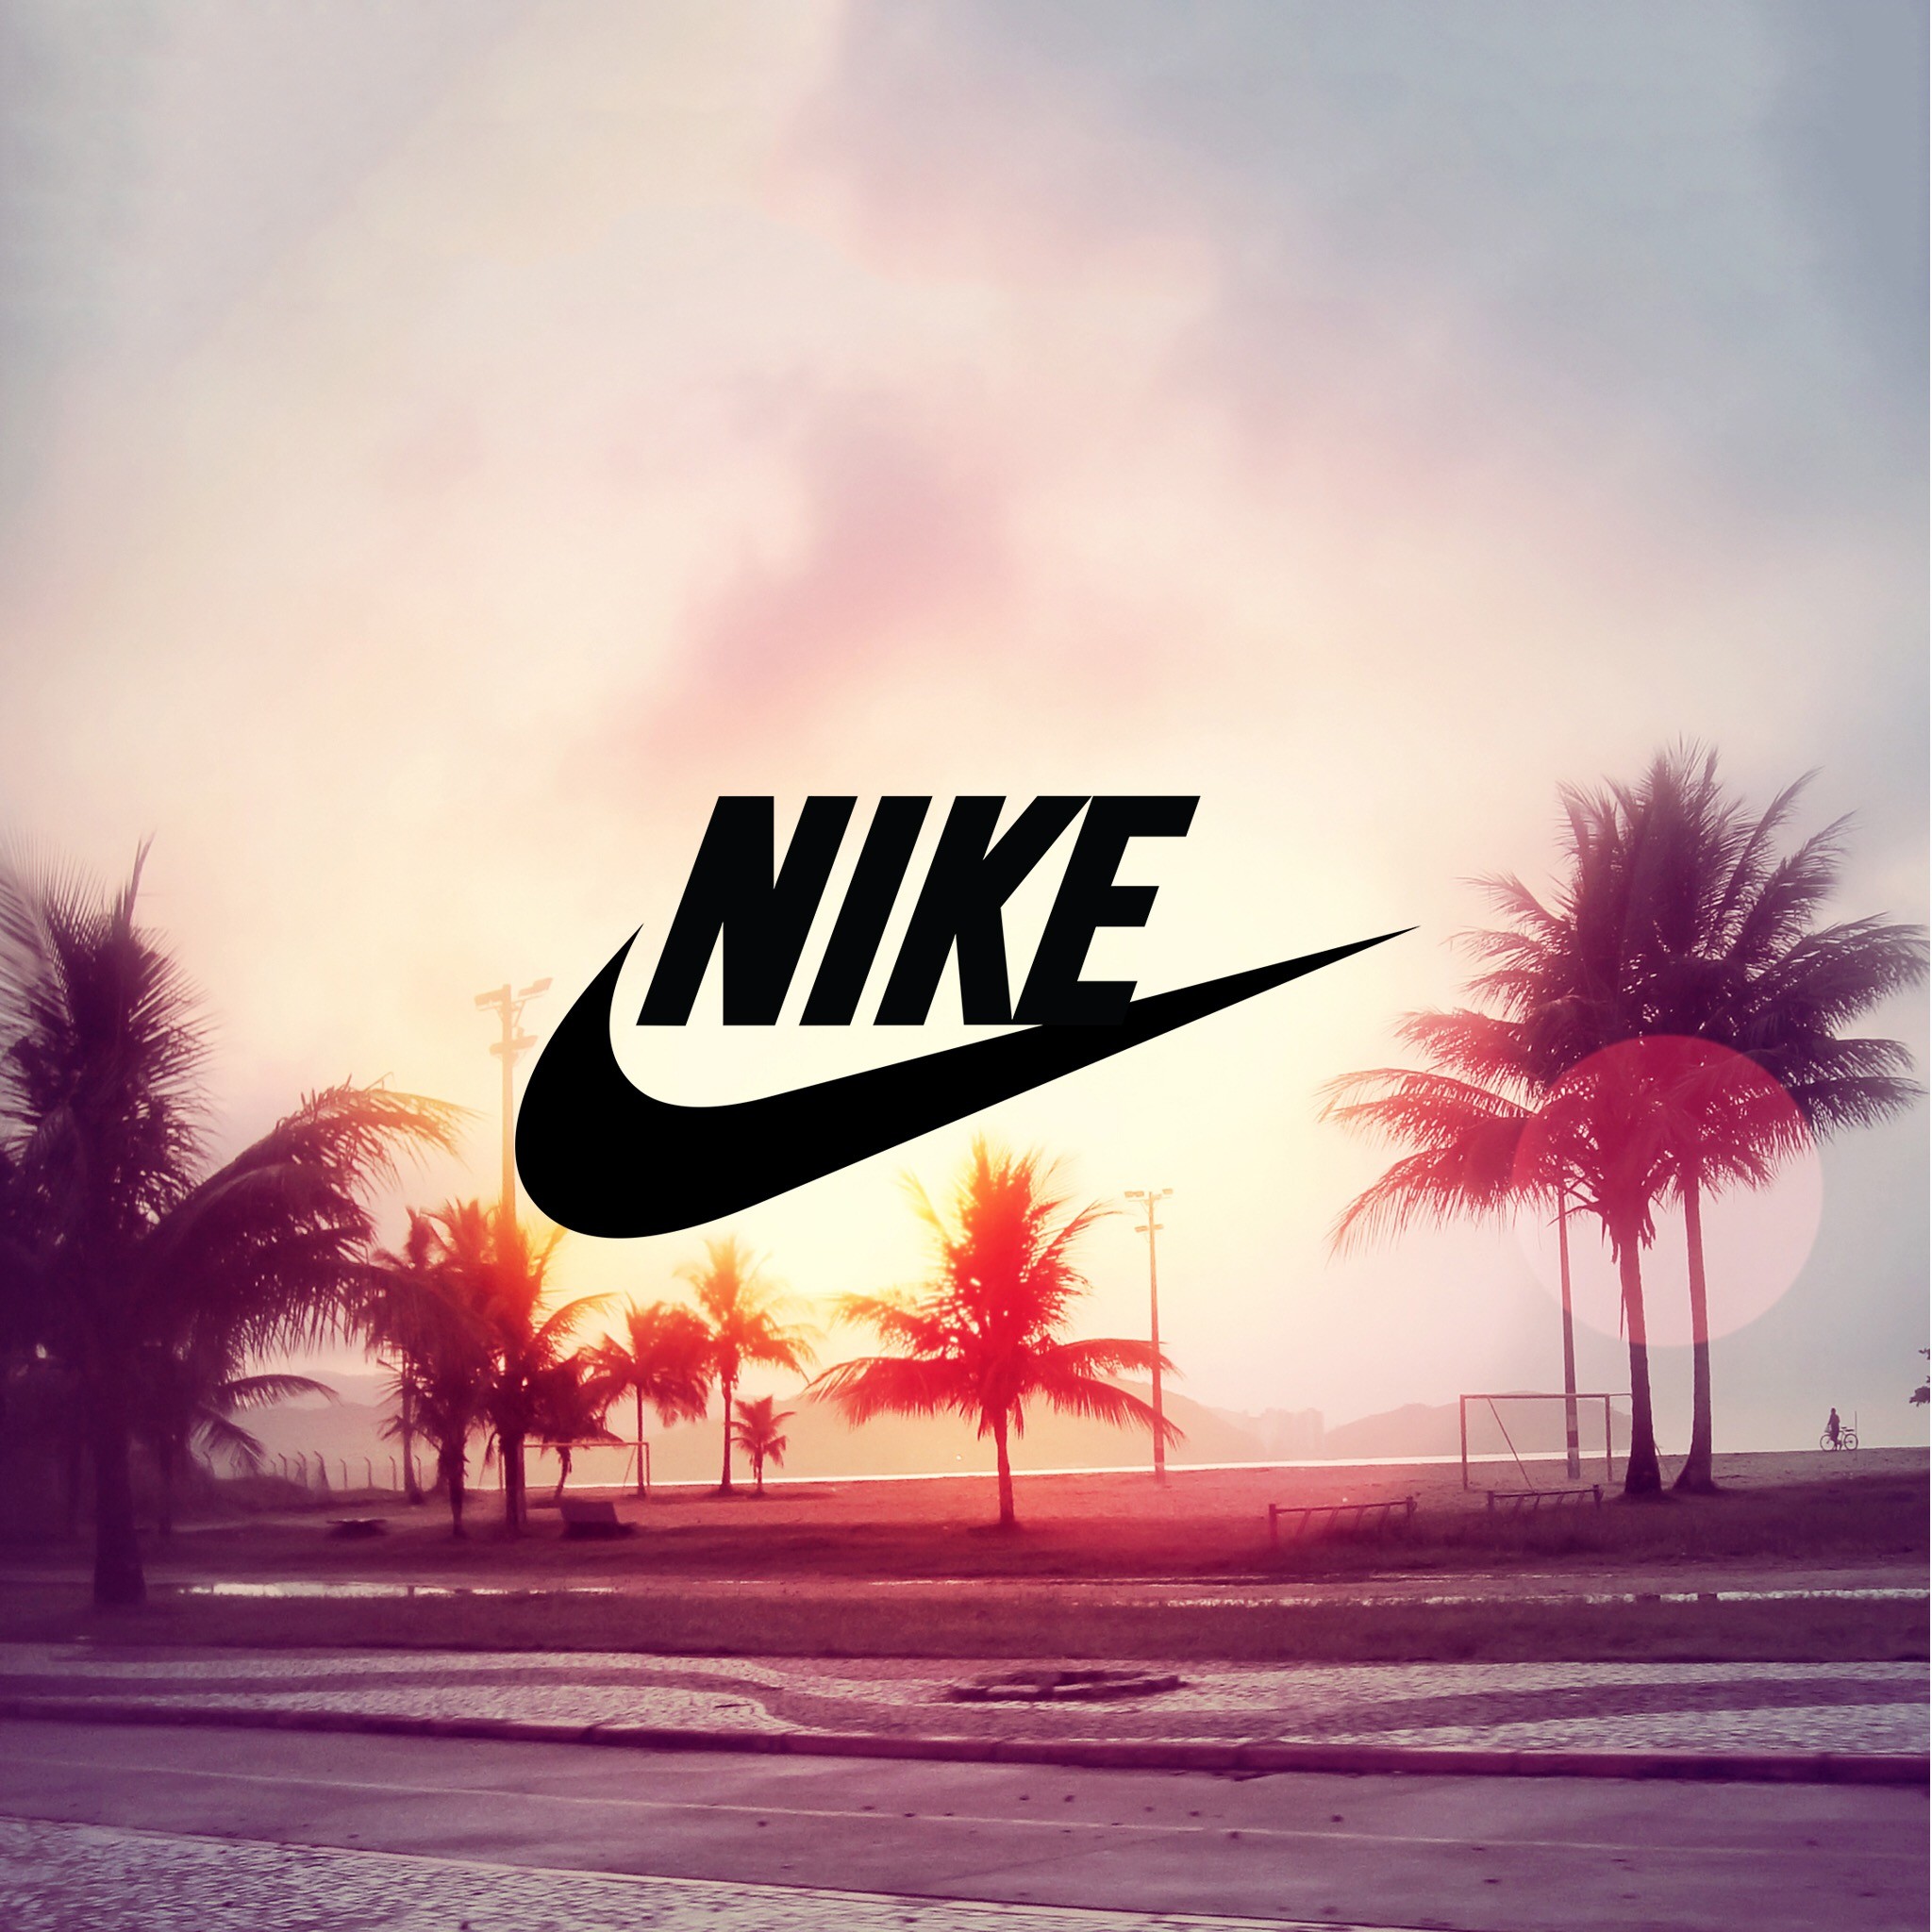 2048x2048 Go places while u still have time... Nike WallpaperNike ...